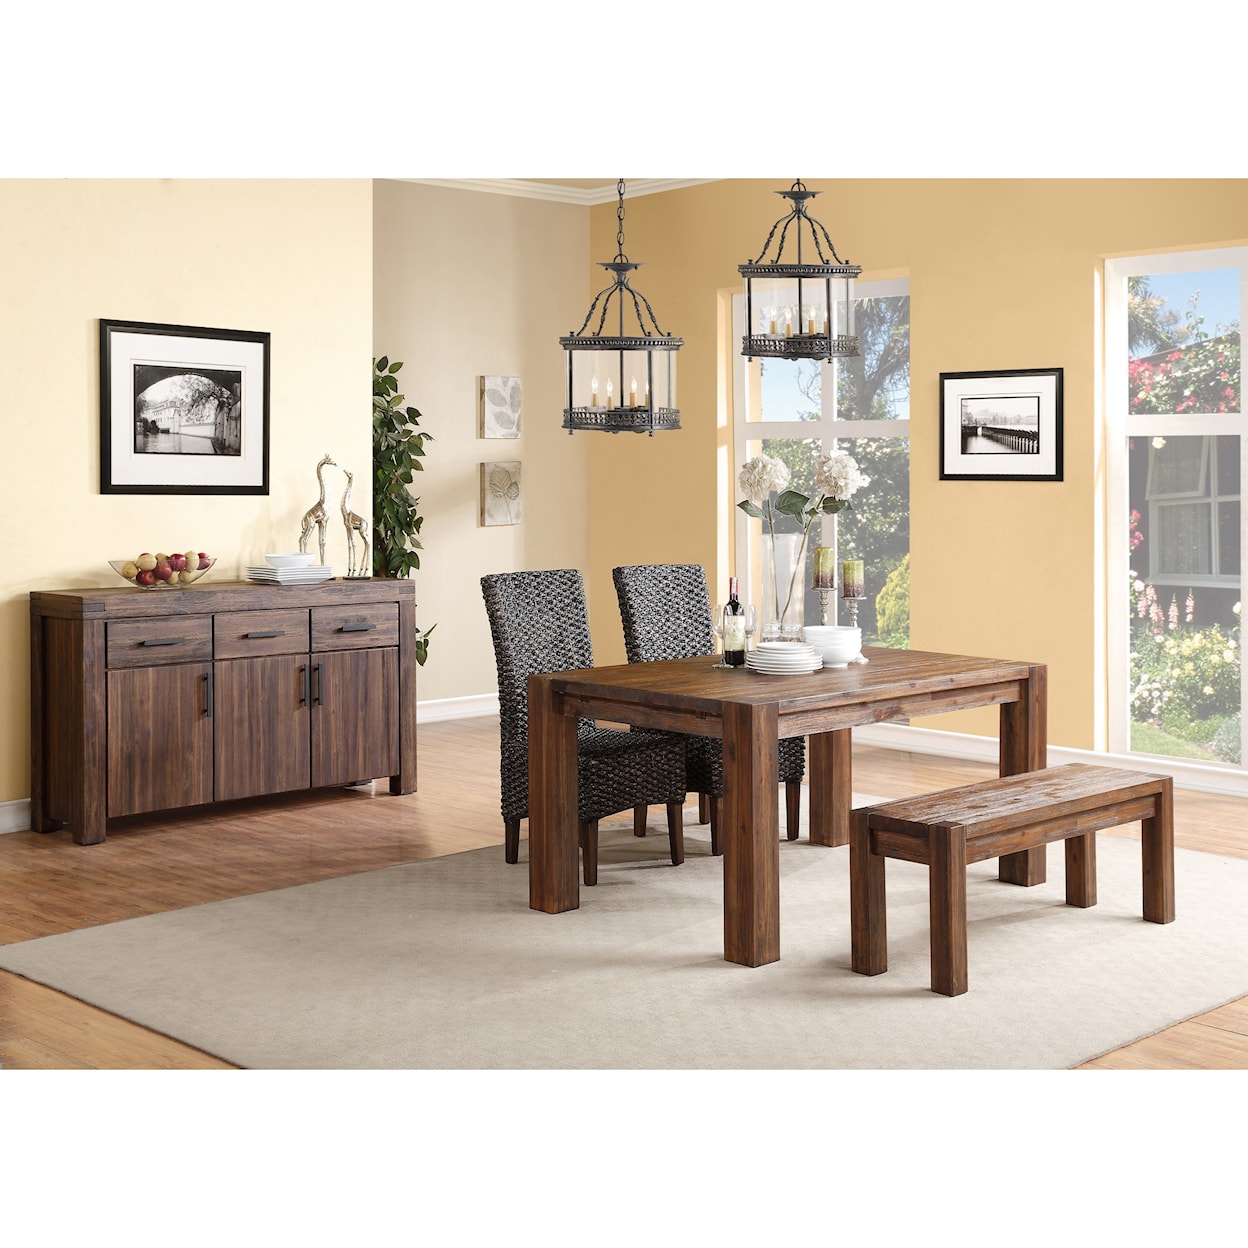 Modus International Meadow Dining Table & Chair Set with Bench